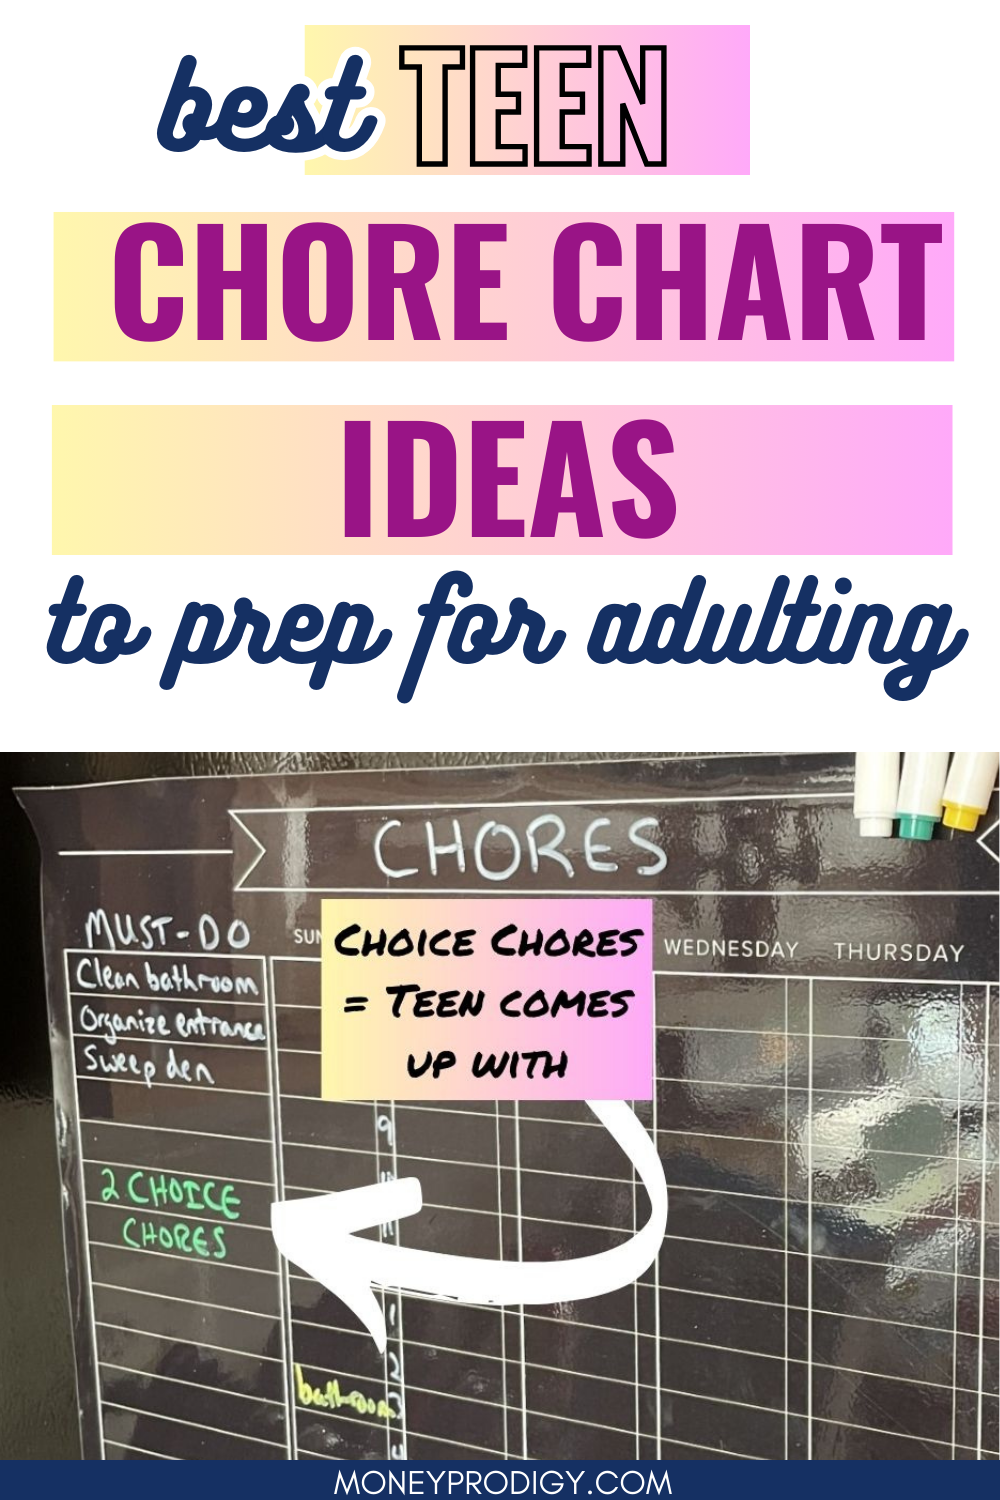 magnetic chore chart for older kids example on fridge, with 2 choice chores for older kids